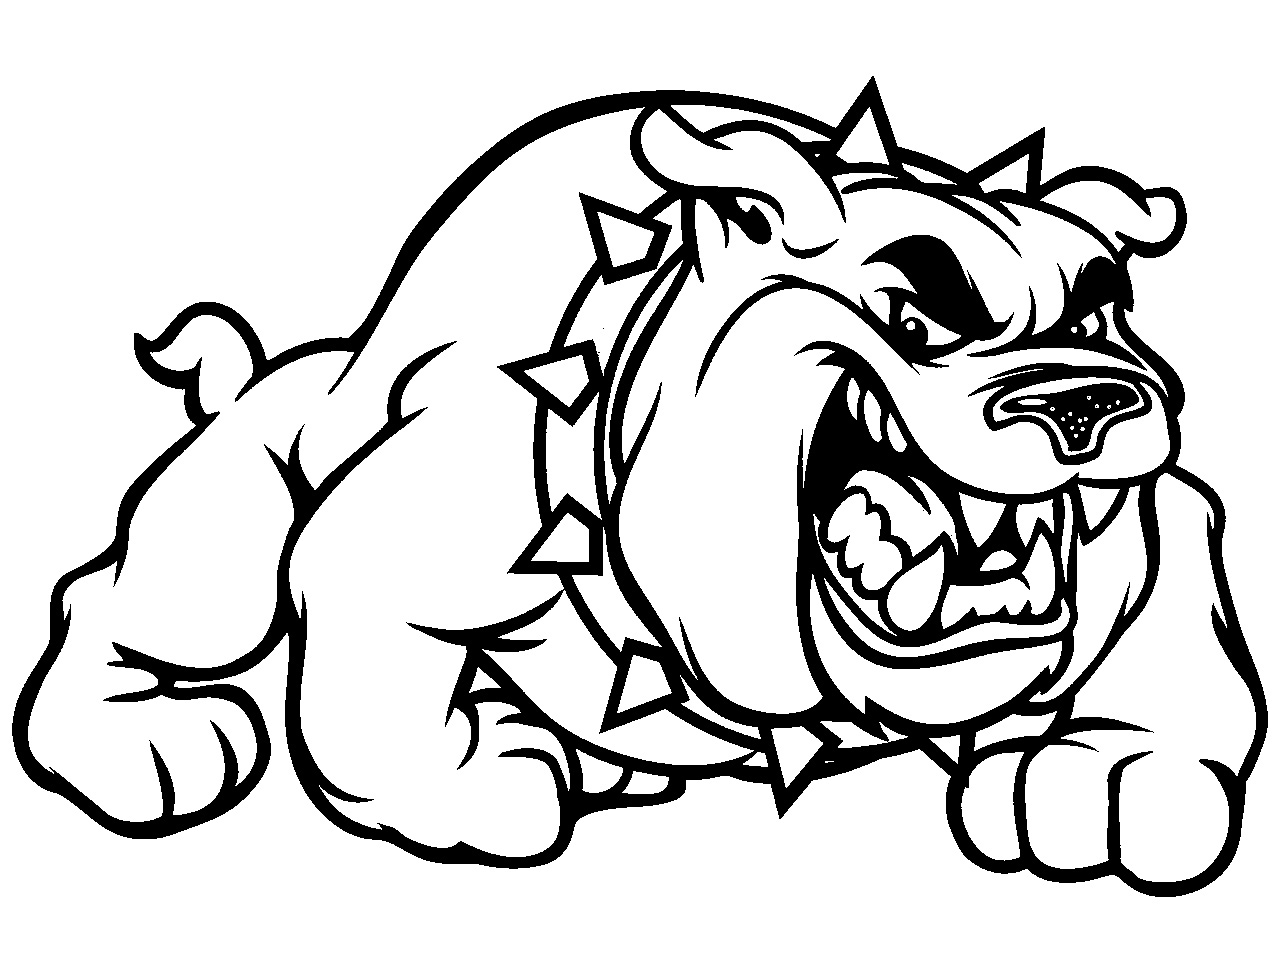 bulldog-coloring-pages-best-coloring-pages-for-kids